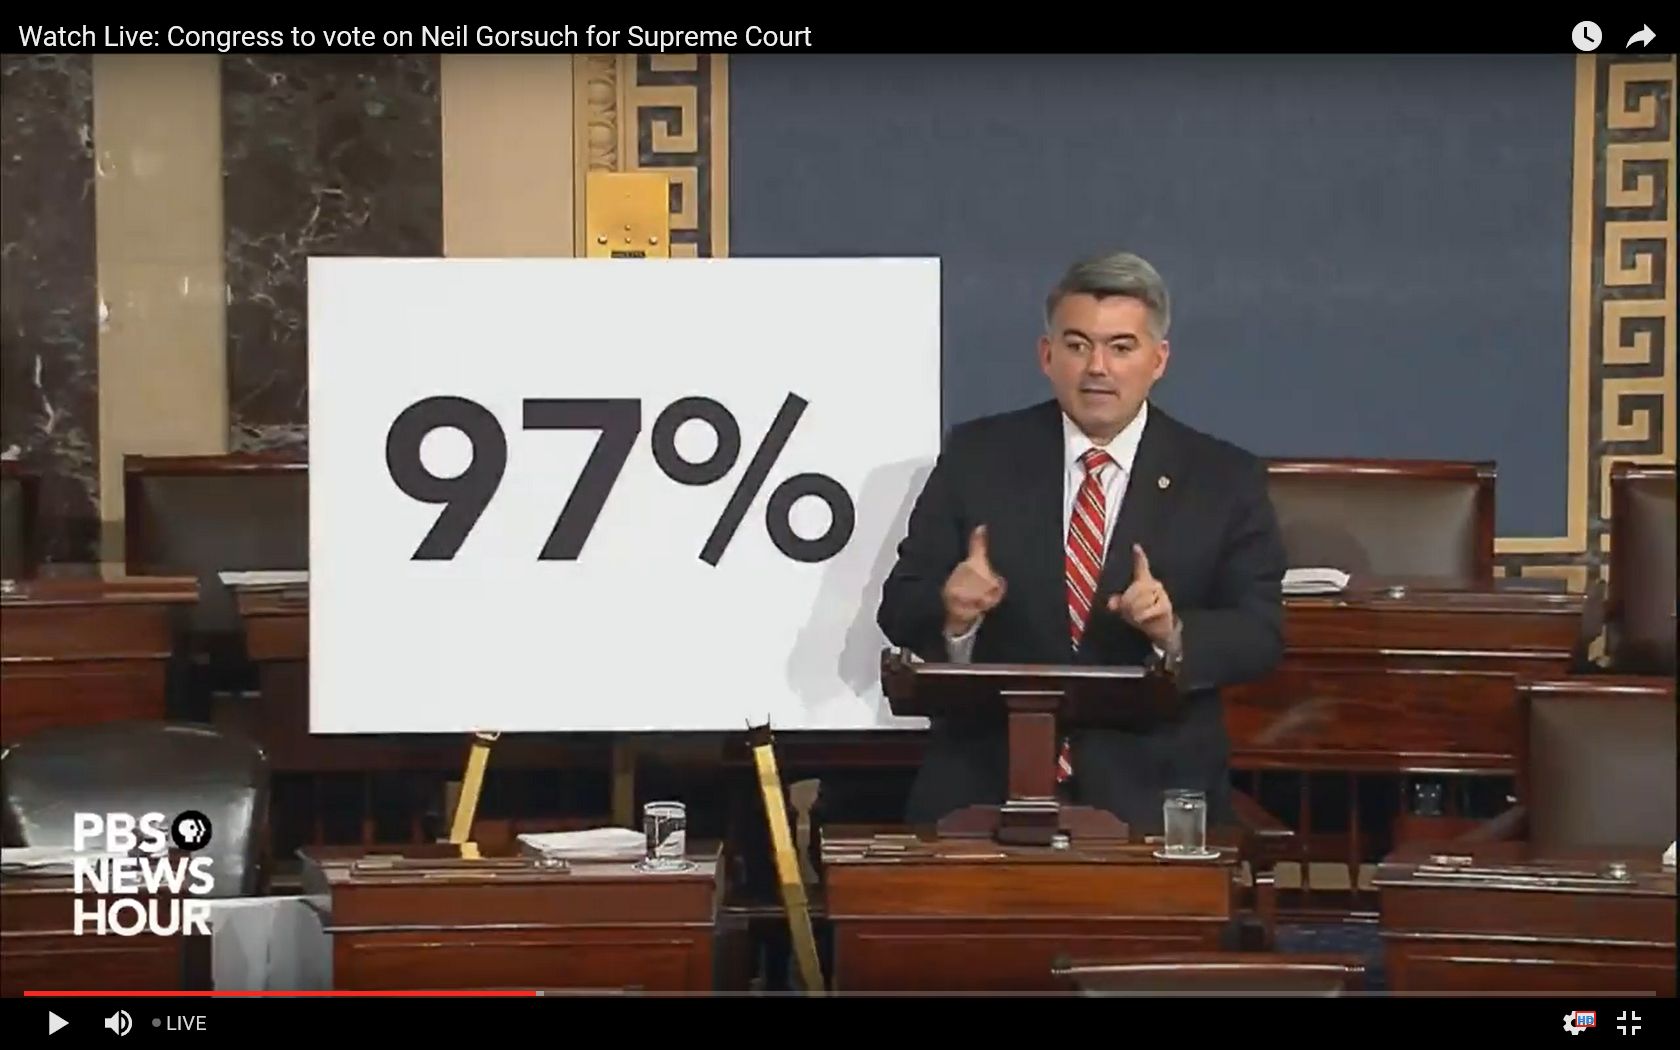 The mystic %100 . Cory Gardner on Gorsuch voting w consensus